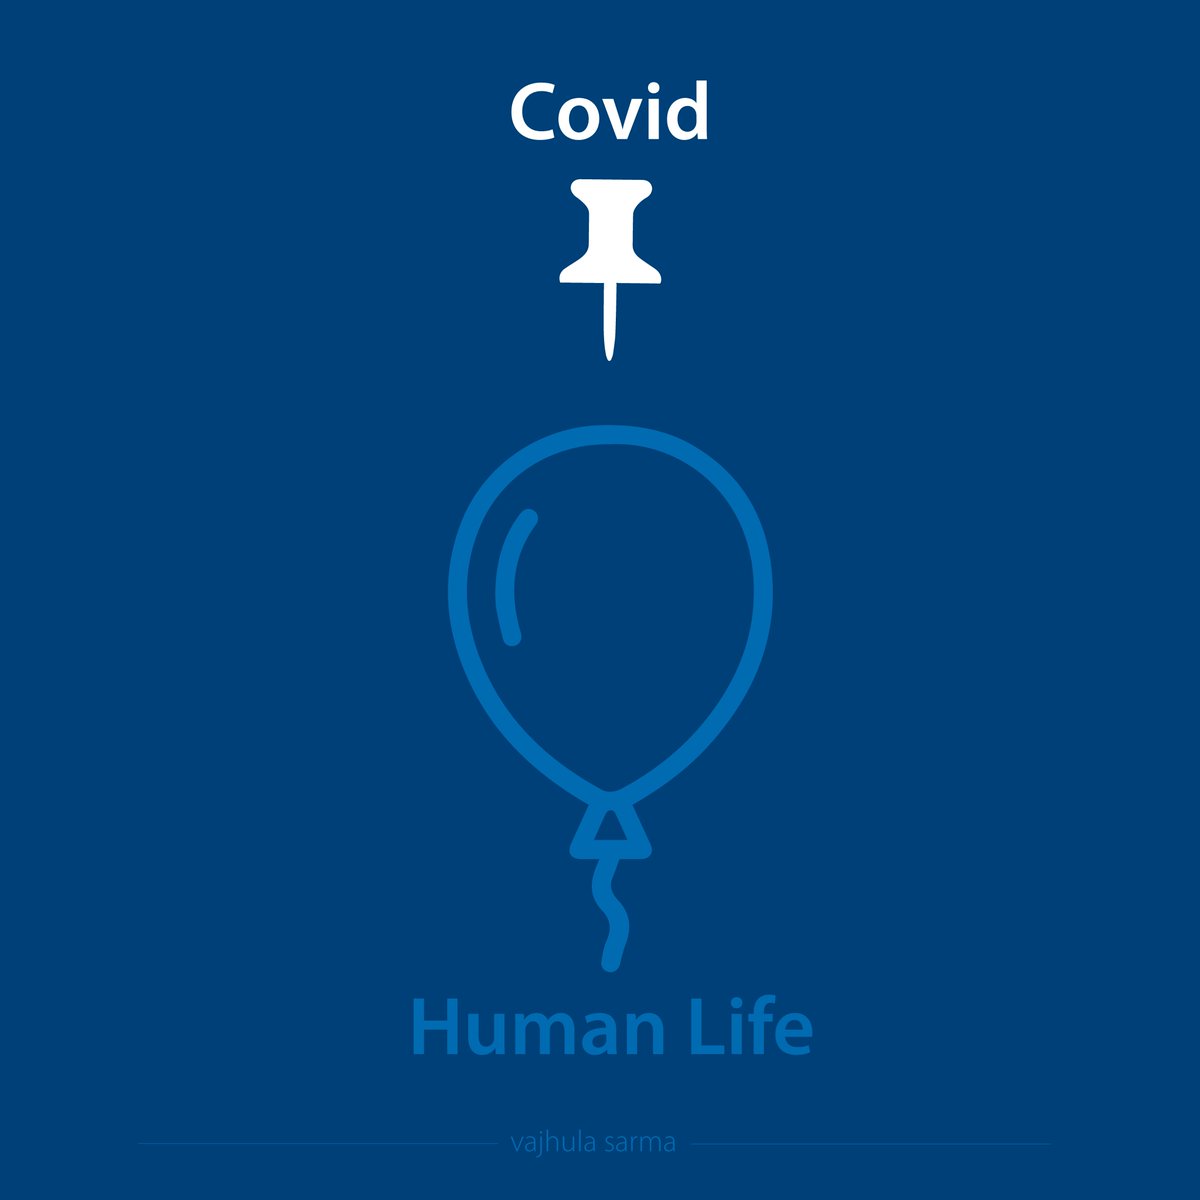 Human life and Covid
#covid #life #humanlife #infographics #informationdesign #infografia #informationgraphics #belloon #pins #health #selfcare #care #satysafe #keepdistance #socialdistance #design #covidwave #pandamic